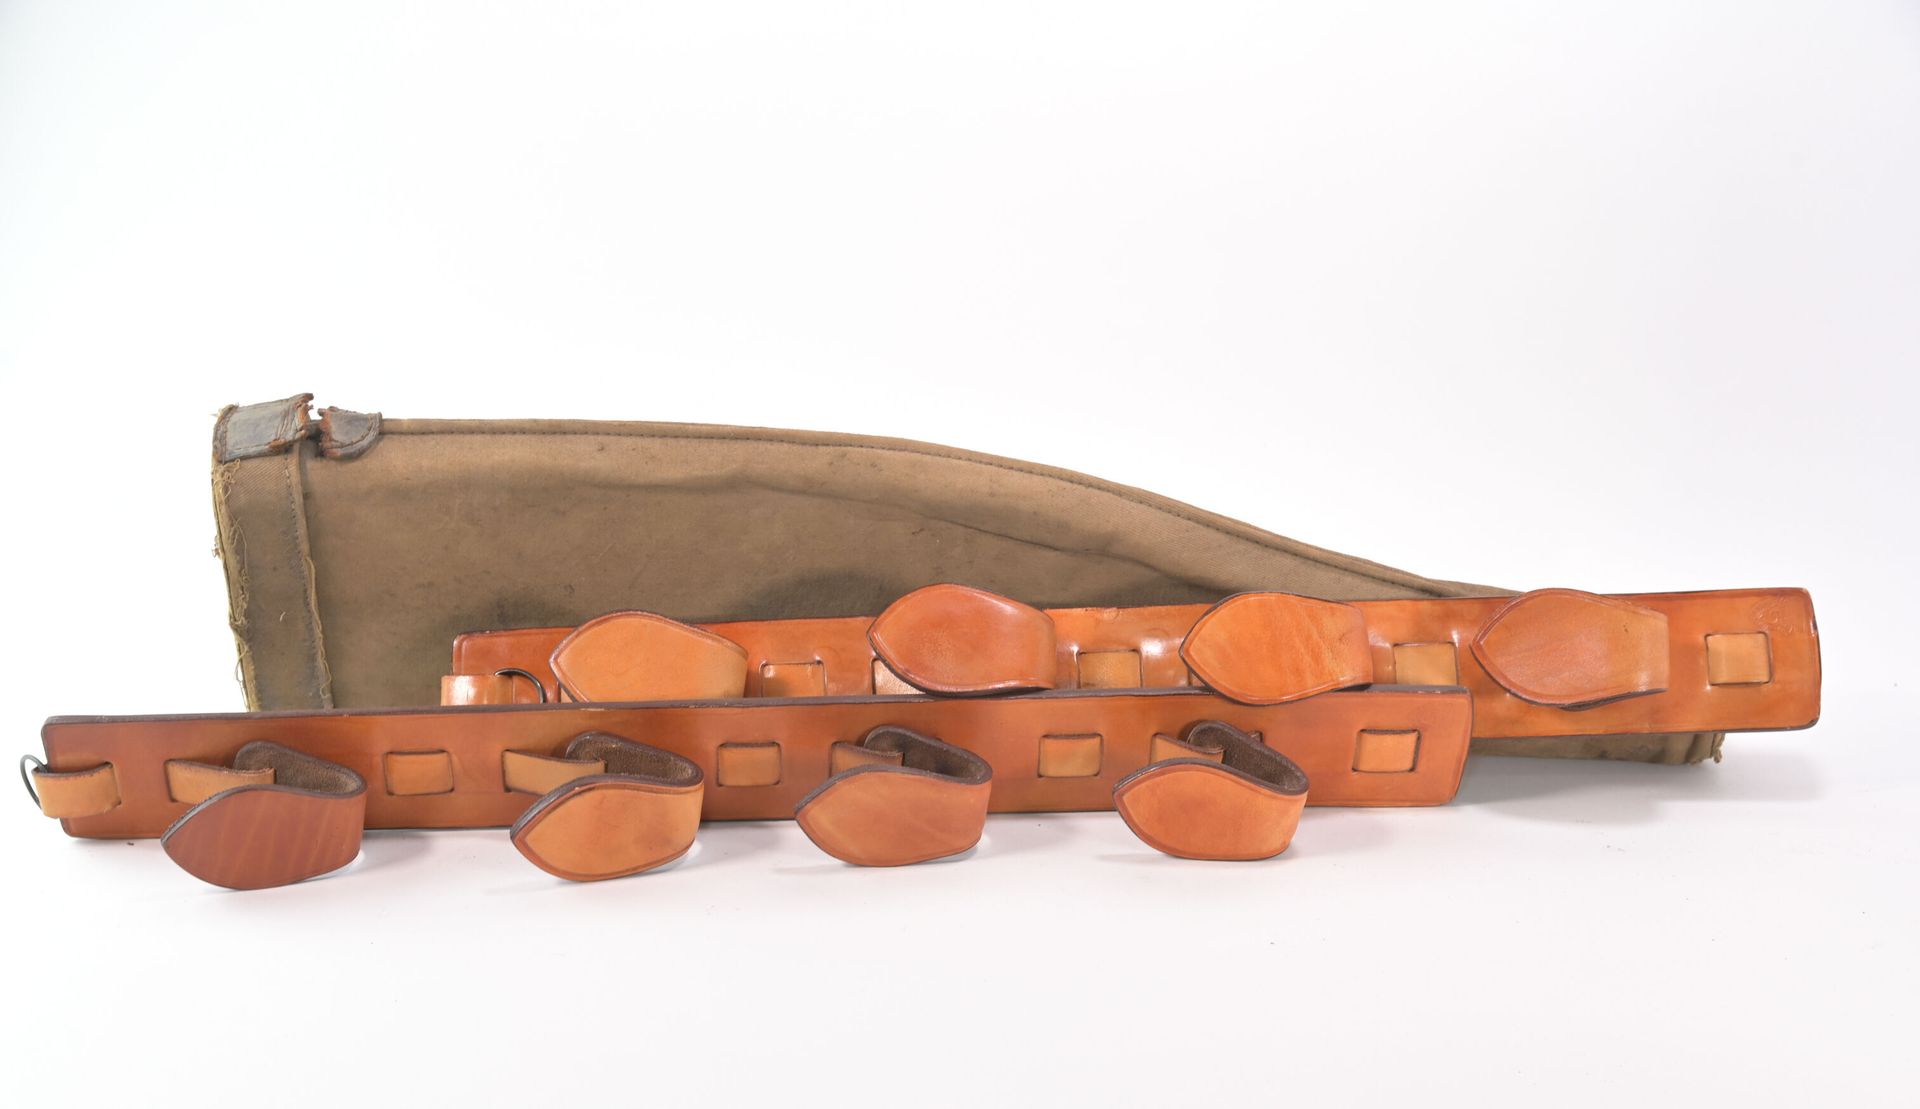 Null Lot:
Fawn leather rifle rack
We joined a canvas rifle cover